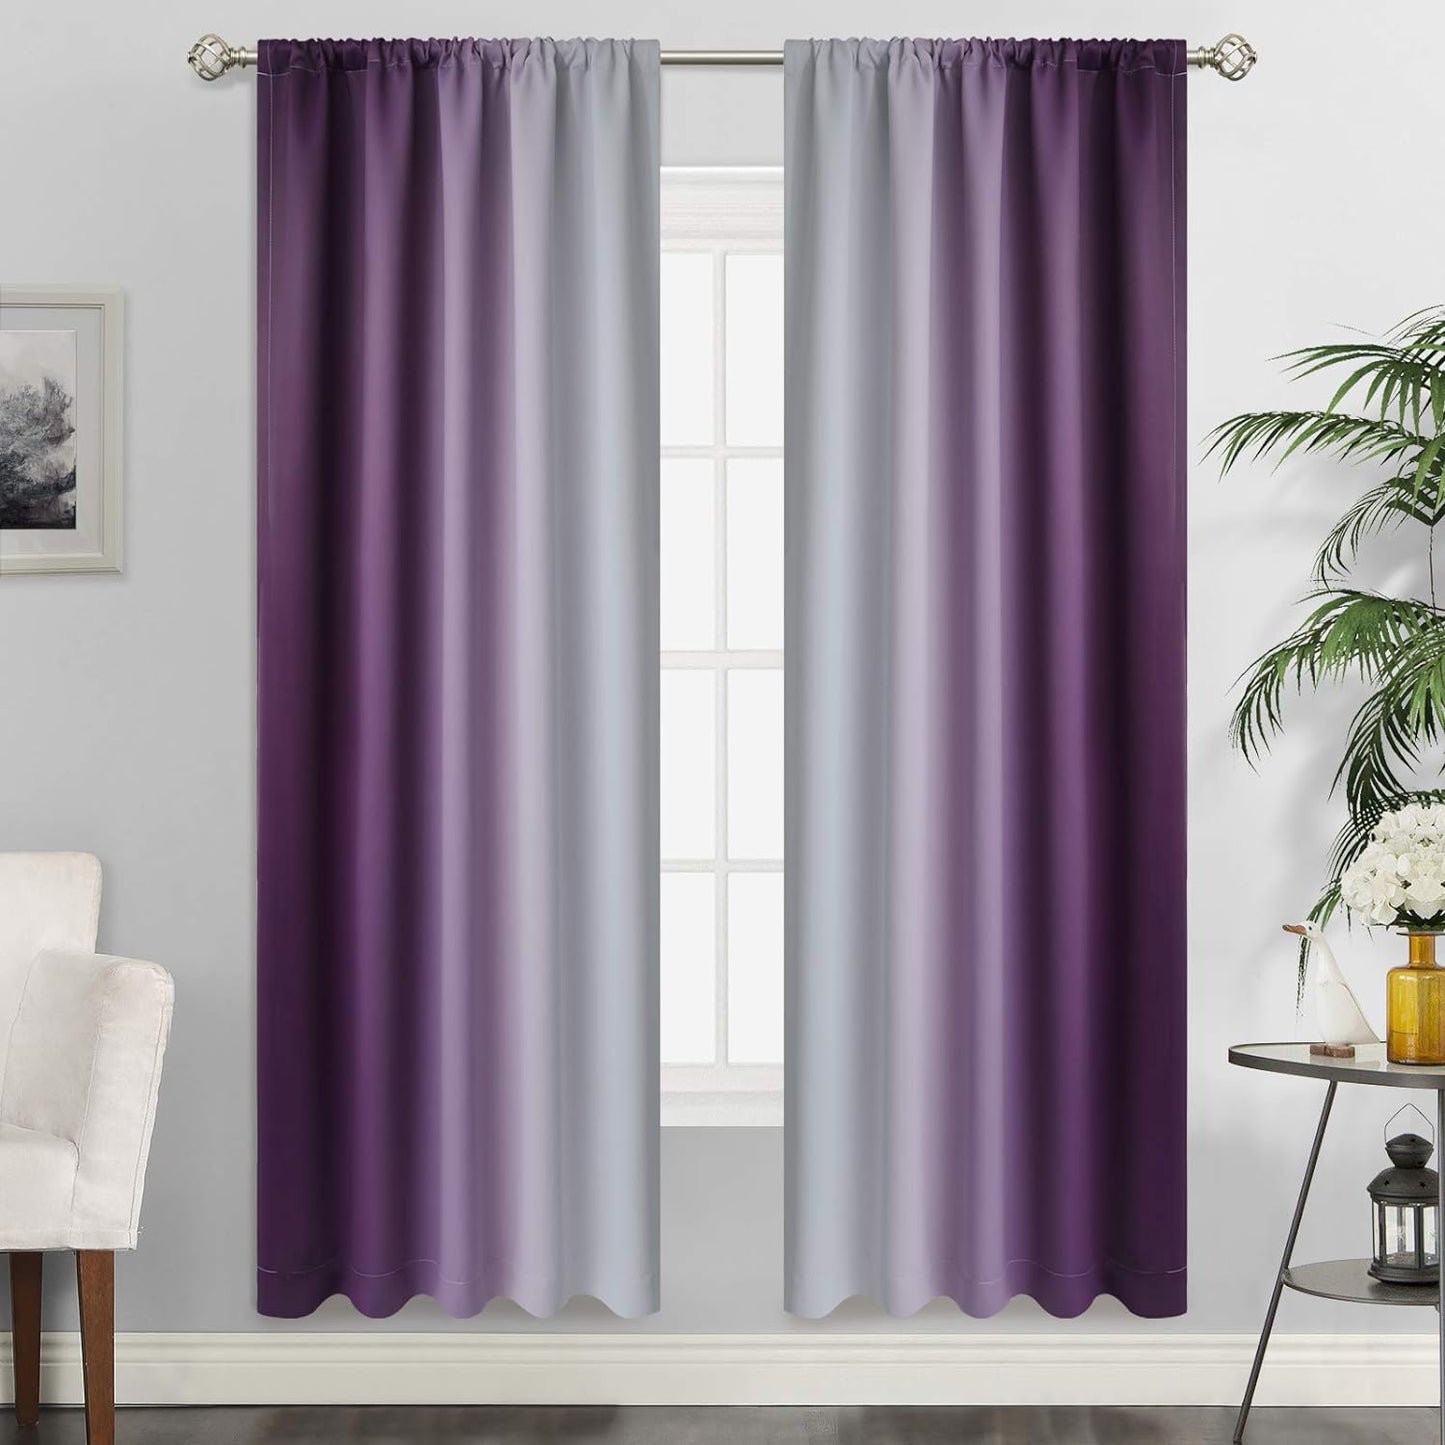 Simplehome Ombre Room Darkening Curtains for Bedroom, Light Blocking Gradient Purple to Greyish White Thermal Insulated Rod Pocket Window Curtains Drapes for Living Room,2 Panels, 52X84 Inches Length  SimpleHome Purple 52W X 72L / 2 Panels 